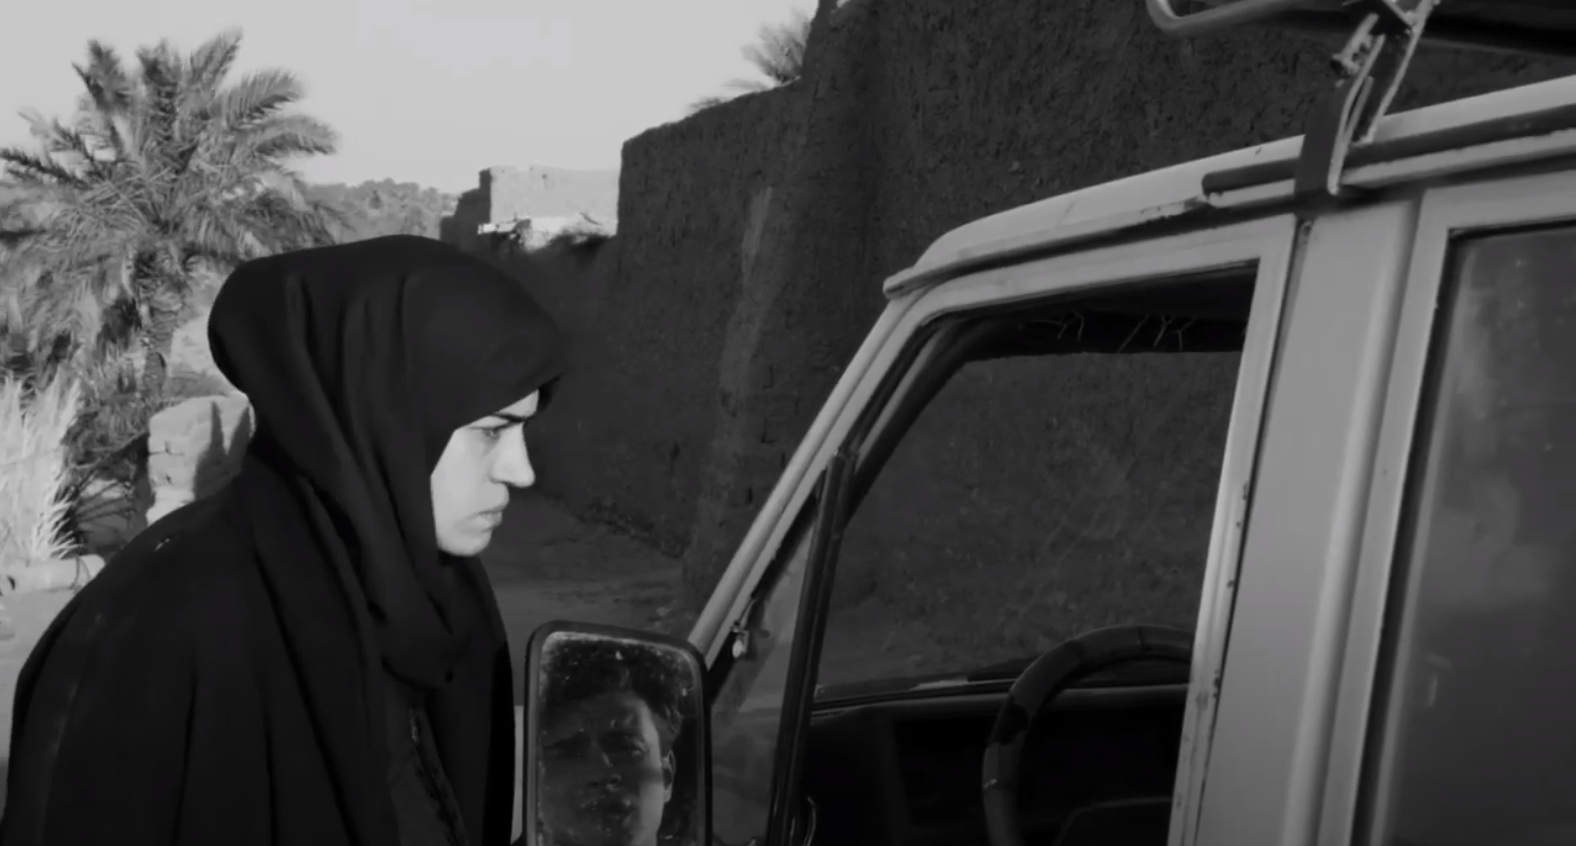 woman wearing burka speaking to someone in a car